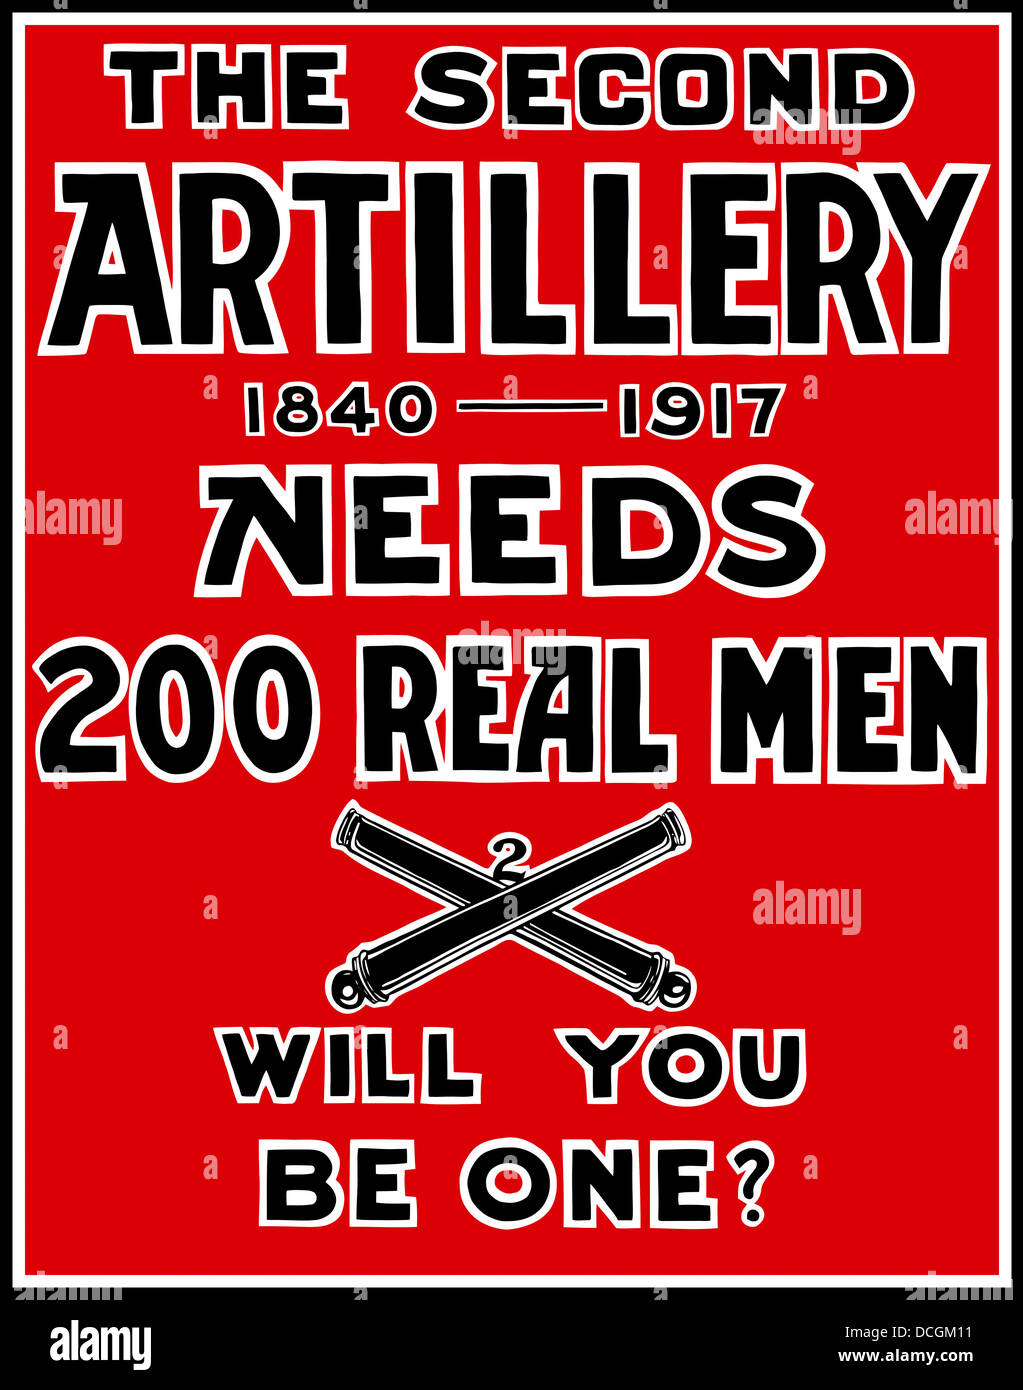 Vintage World War I propaganda poster. It reads, The Second Artillery 1840-1917 Needs 200 Real Men, Will you be one? Stock Photo